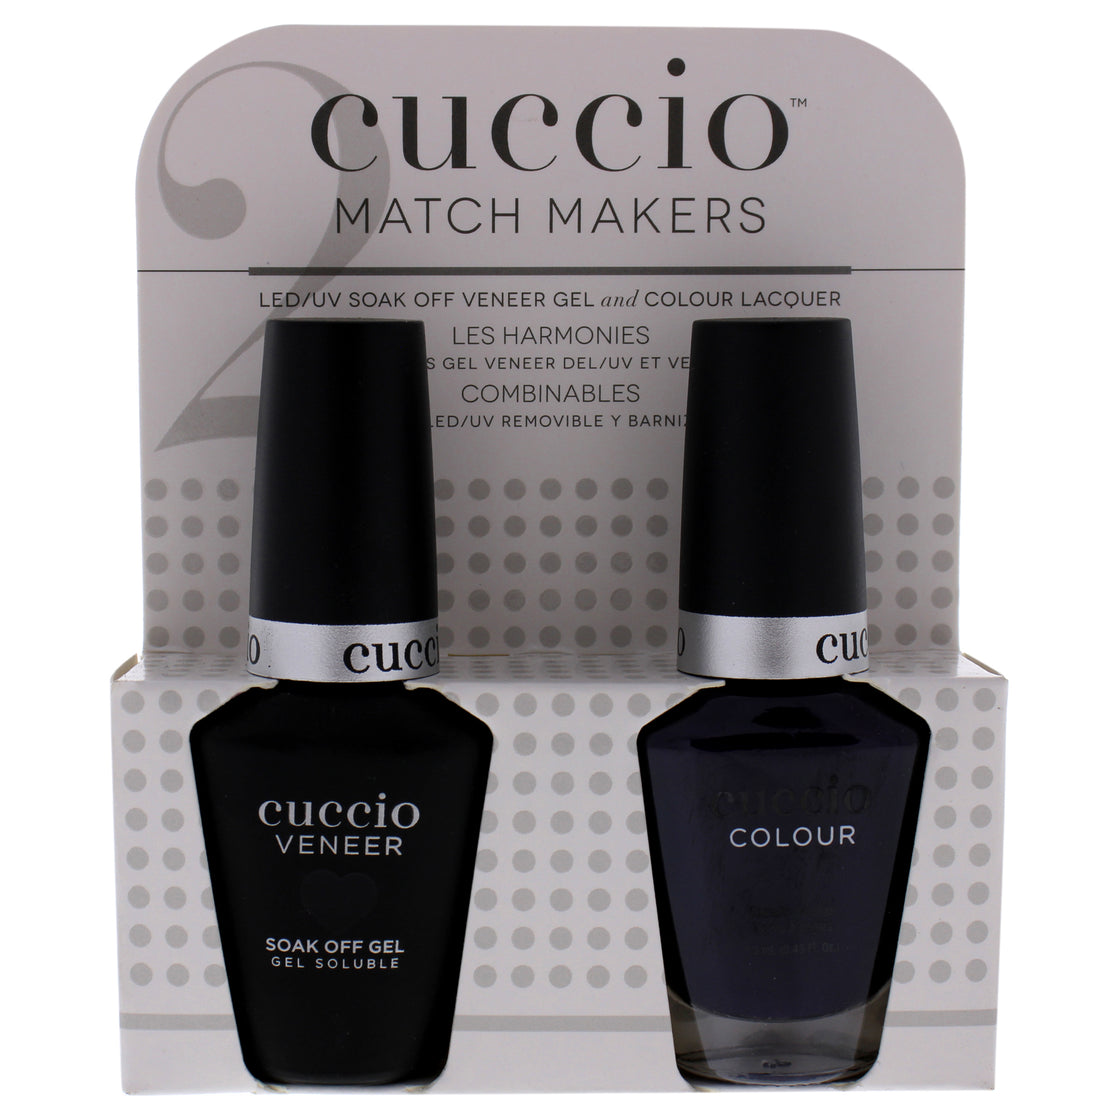 Match Makers Set - Quilty As Charged by Cuccio Colour for Women - 2 Pc 0.44oz Veneer Soak Of Gel Nail Polish, 0.43oz Colour Nail Polish